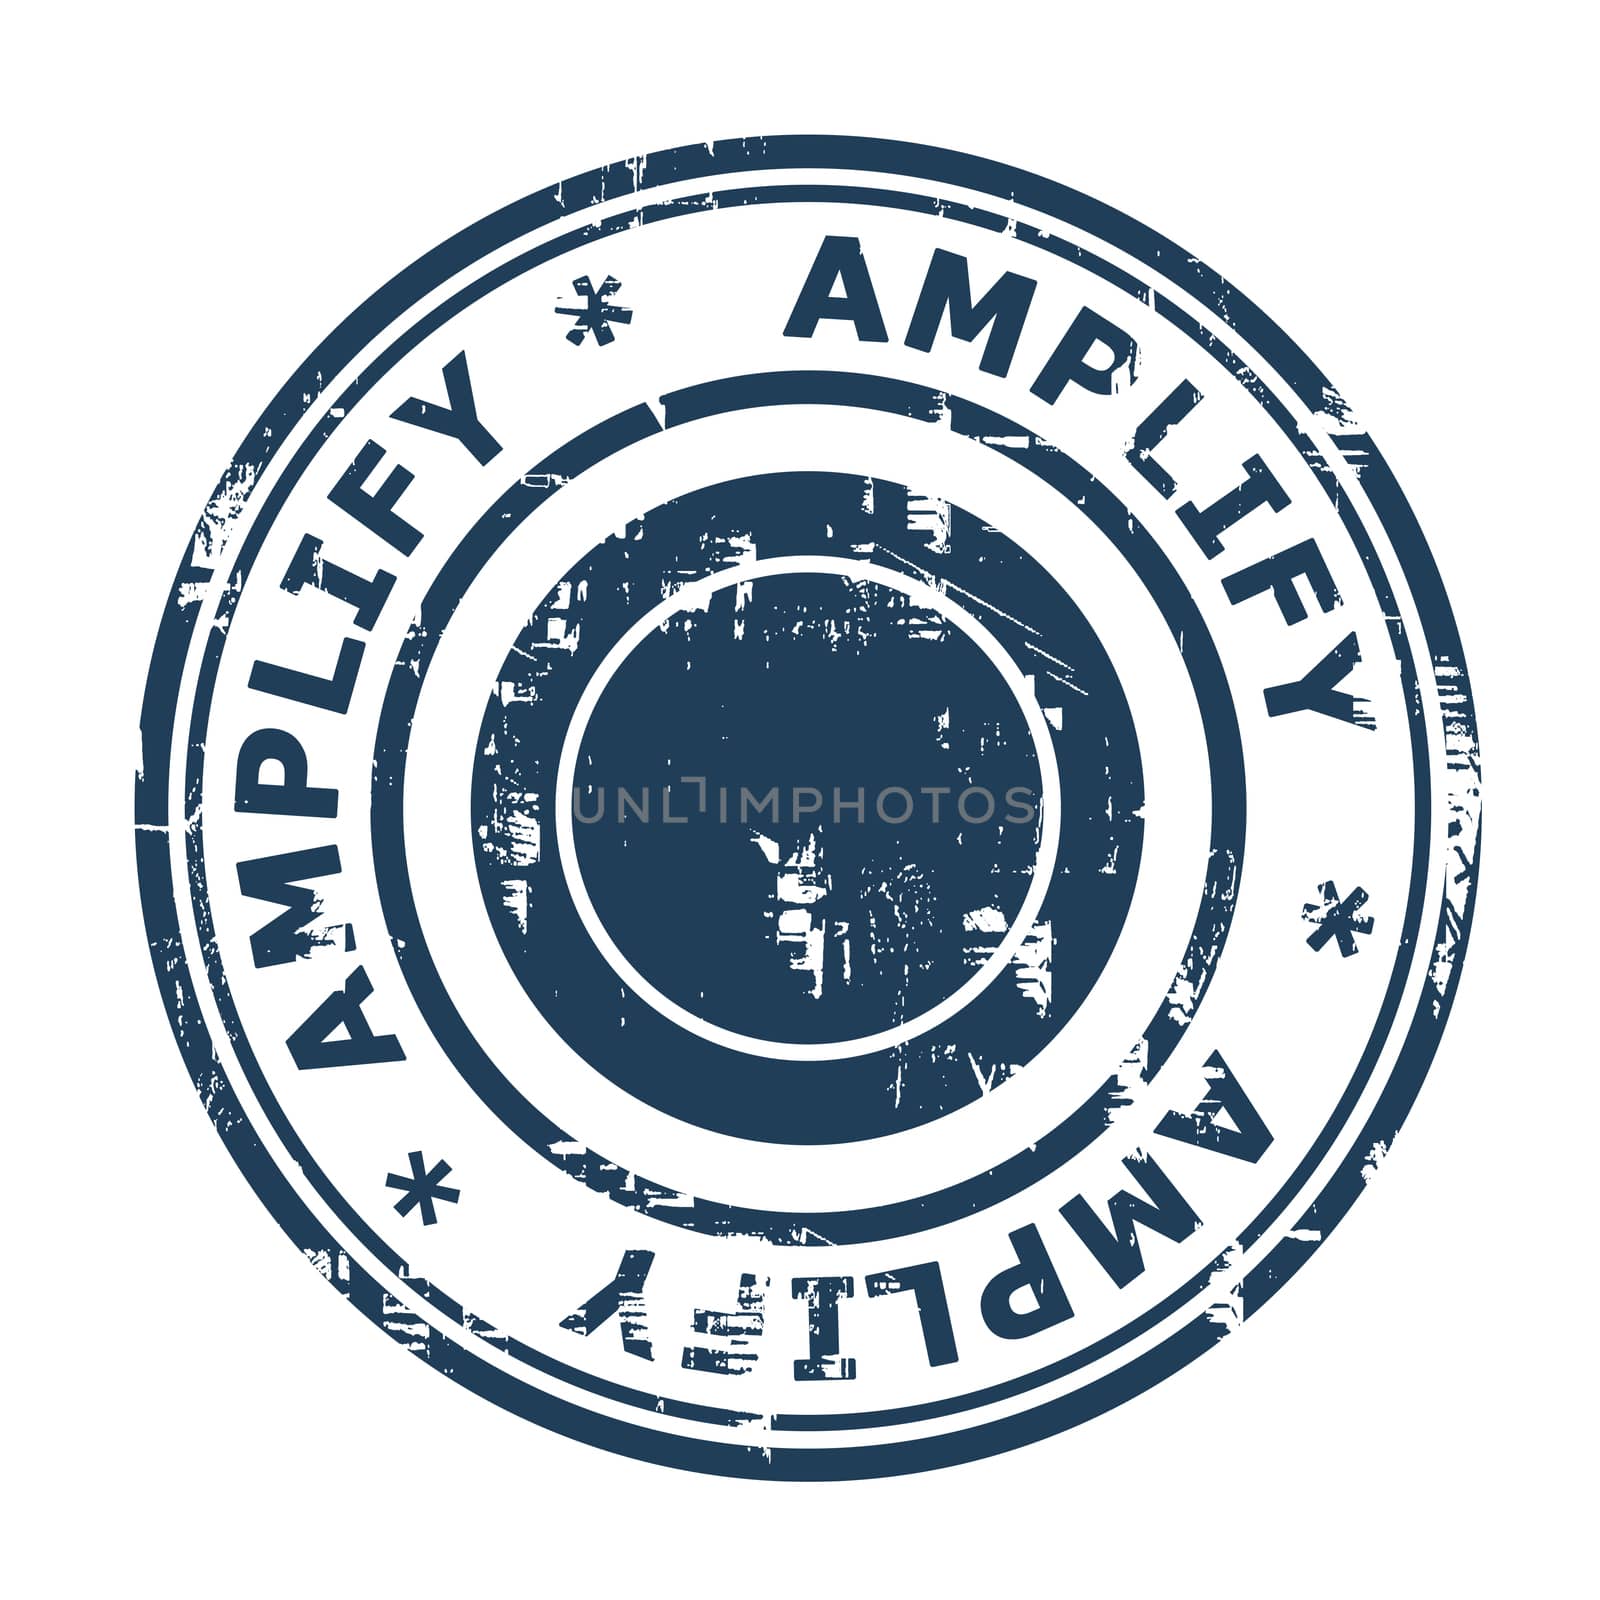 Amplify business concept stamp by speedfighter